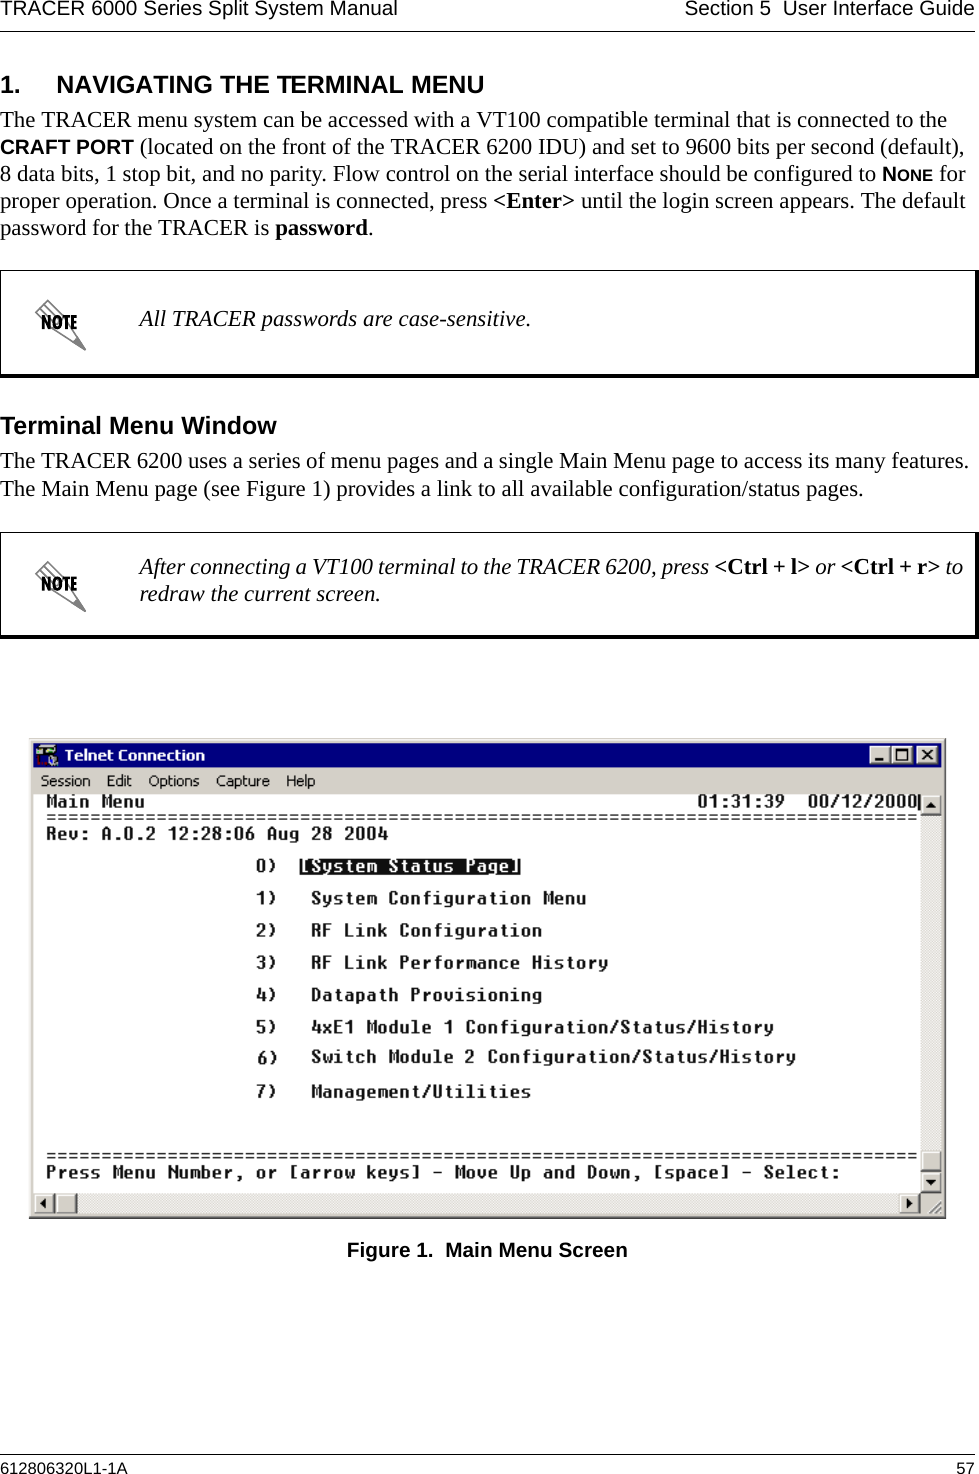 TRACER 6000 Series Split System Manual Section 5  User Interface Guide612806320L1-1A 571. NAVIGATING THE TERMINAL MENUThe TRACER menu system can be accessed with a VT100 compatible terminal that is connected to the CRAFT PORT (located on the front of the TRACER 6200 IDU) and set to 9600 bits per second (default), 8 data bits, 1 stop bit, and no parity. Flow control on the serial interface should be configured to NONE for proper operation. Once a terminal is connected, press &lt;Enter&gt; until the login screen appears. The default password for the TRACER is password.Terminal Menu WindowThe TRACER 6200 uses a series of menu pages and a single Main Menu page to access its many features. The Main Menu page (see Figure 1) provides a link to all available configuration/status pages.Figure 1.  Main Menu ScreenAll TRACER passwords are case-sensitive.After connecting a VT100 terminal to the TRACER 6200, press &lt;Ctrl + l&gt; or &lt;Ctrl + r&gt; to redraw the current screen.